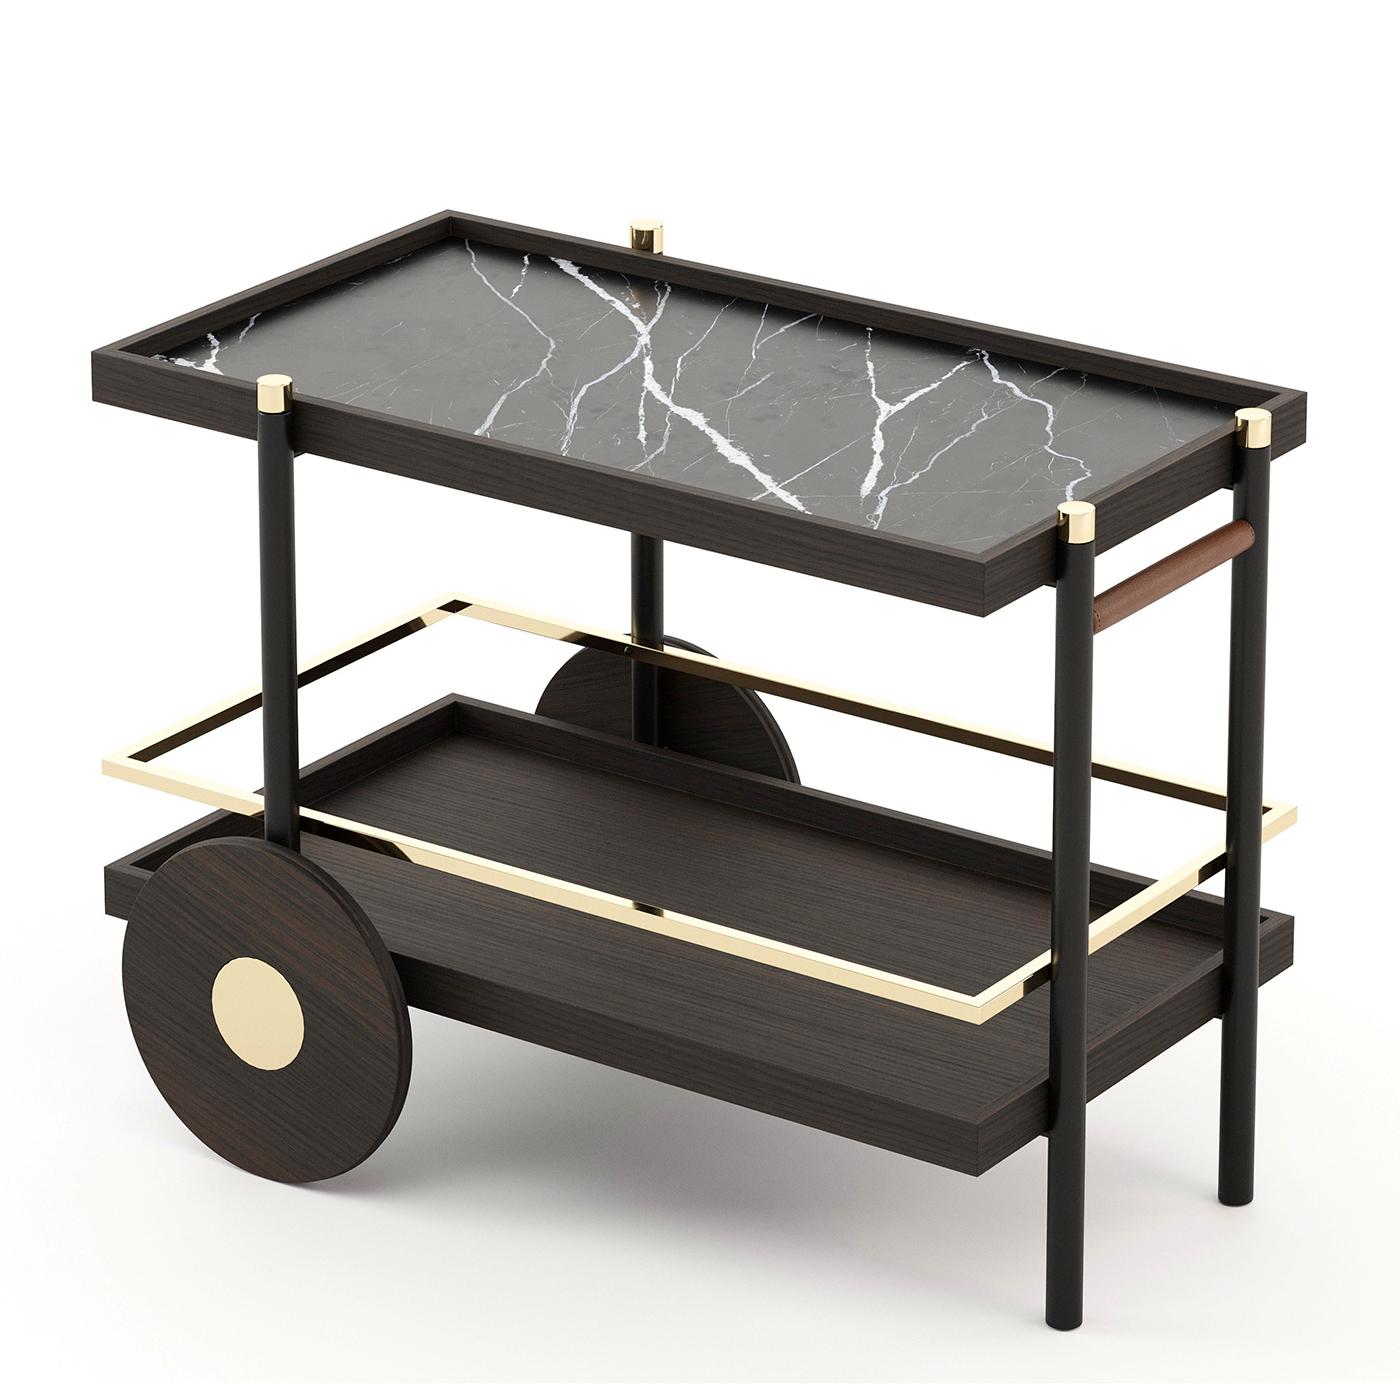 Trolley Hector with wooden structure in smocked.
Oak matte finish, with polished stainless steel in gold.
Finish and with 1 handle covered with brown leather.
Upper top in black marble and bottom top in wood
In smocked oak matte finish.
Also